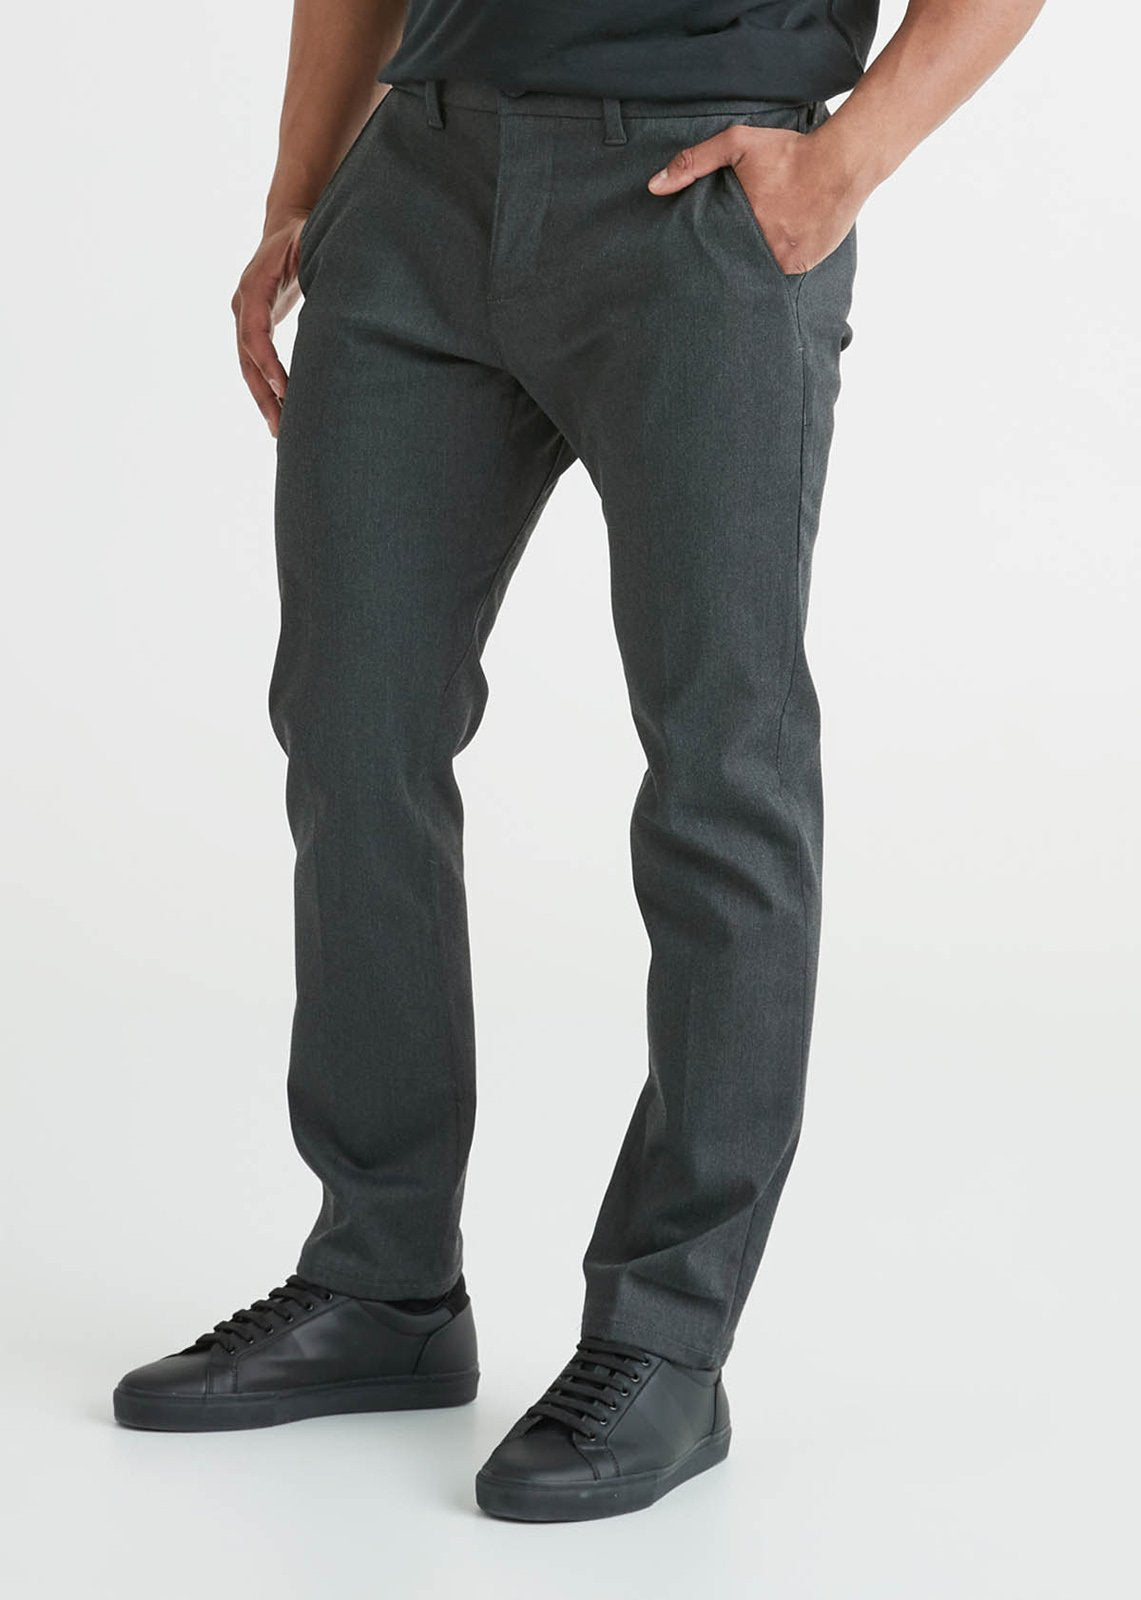 Men's Charcoal Relaxed Fit Stretch Dress Pant